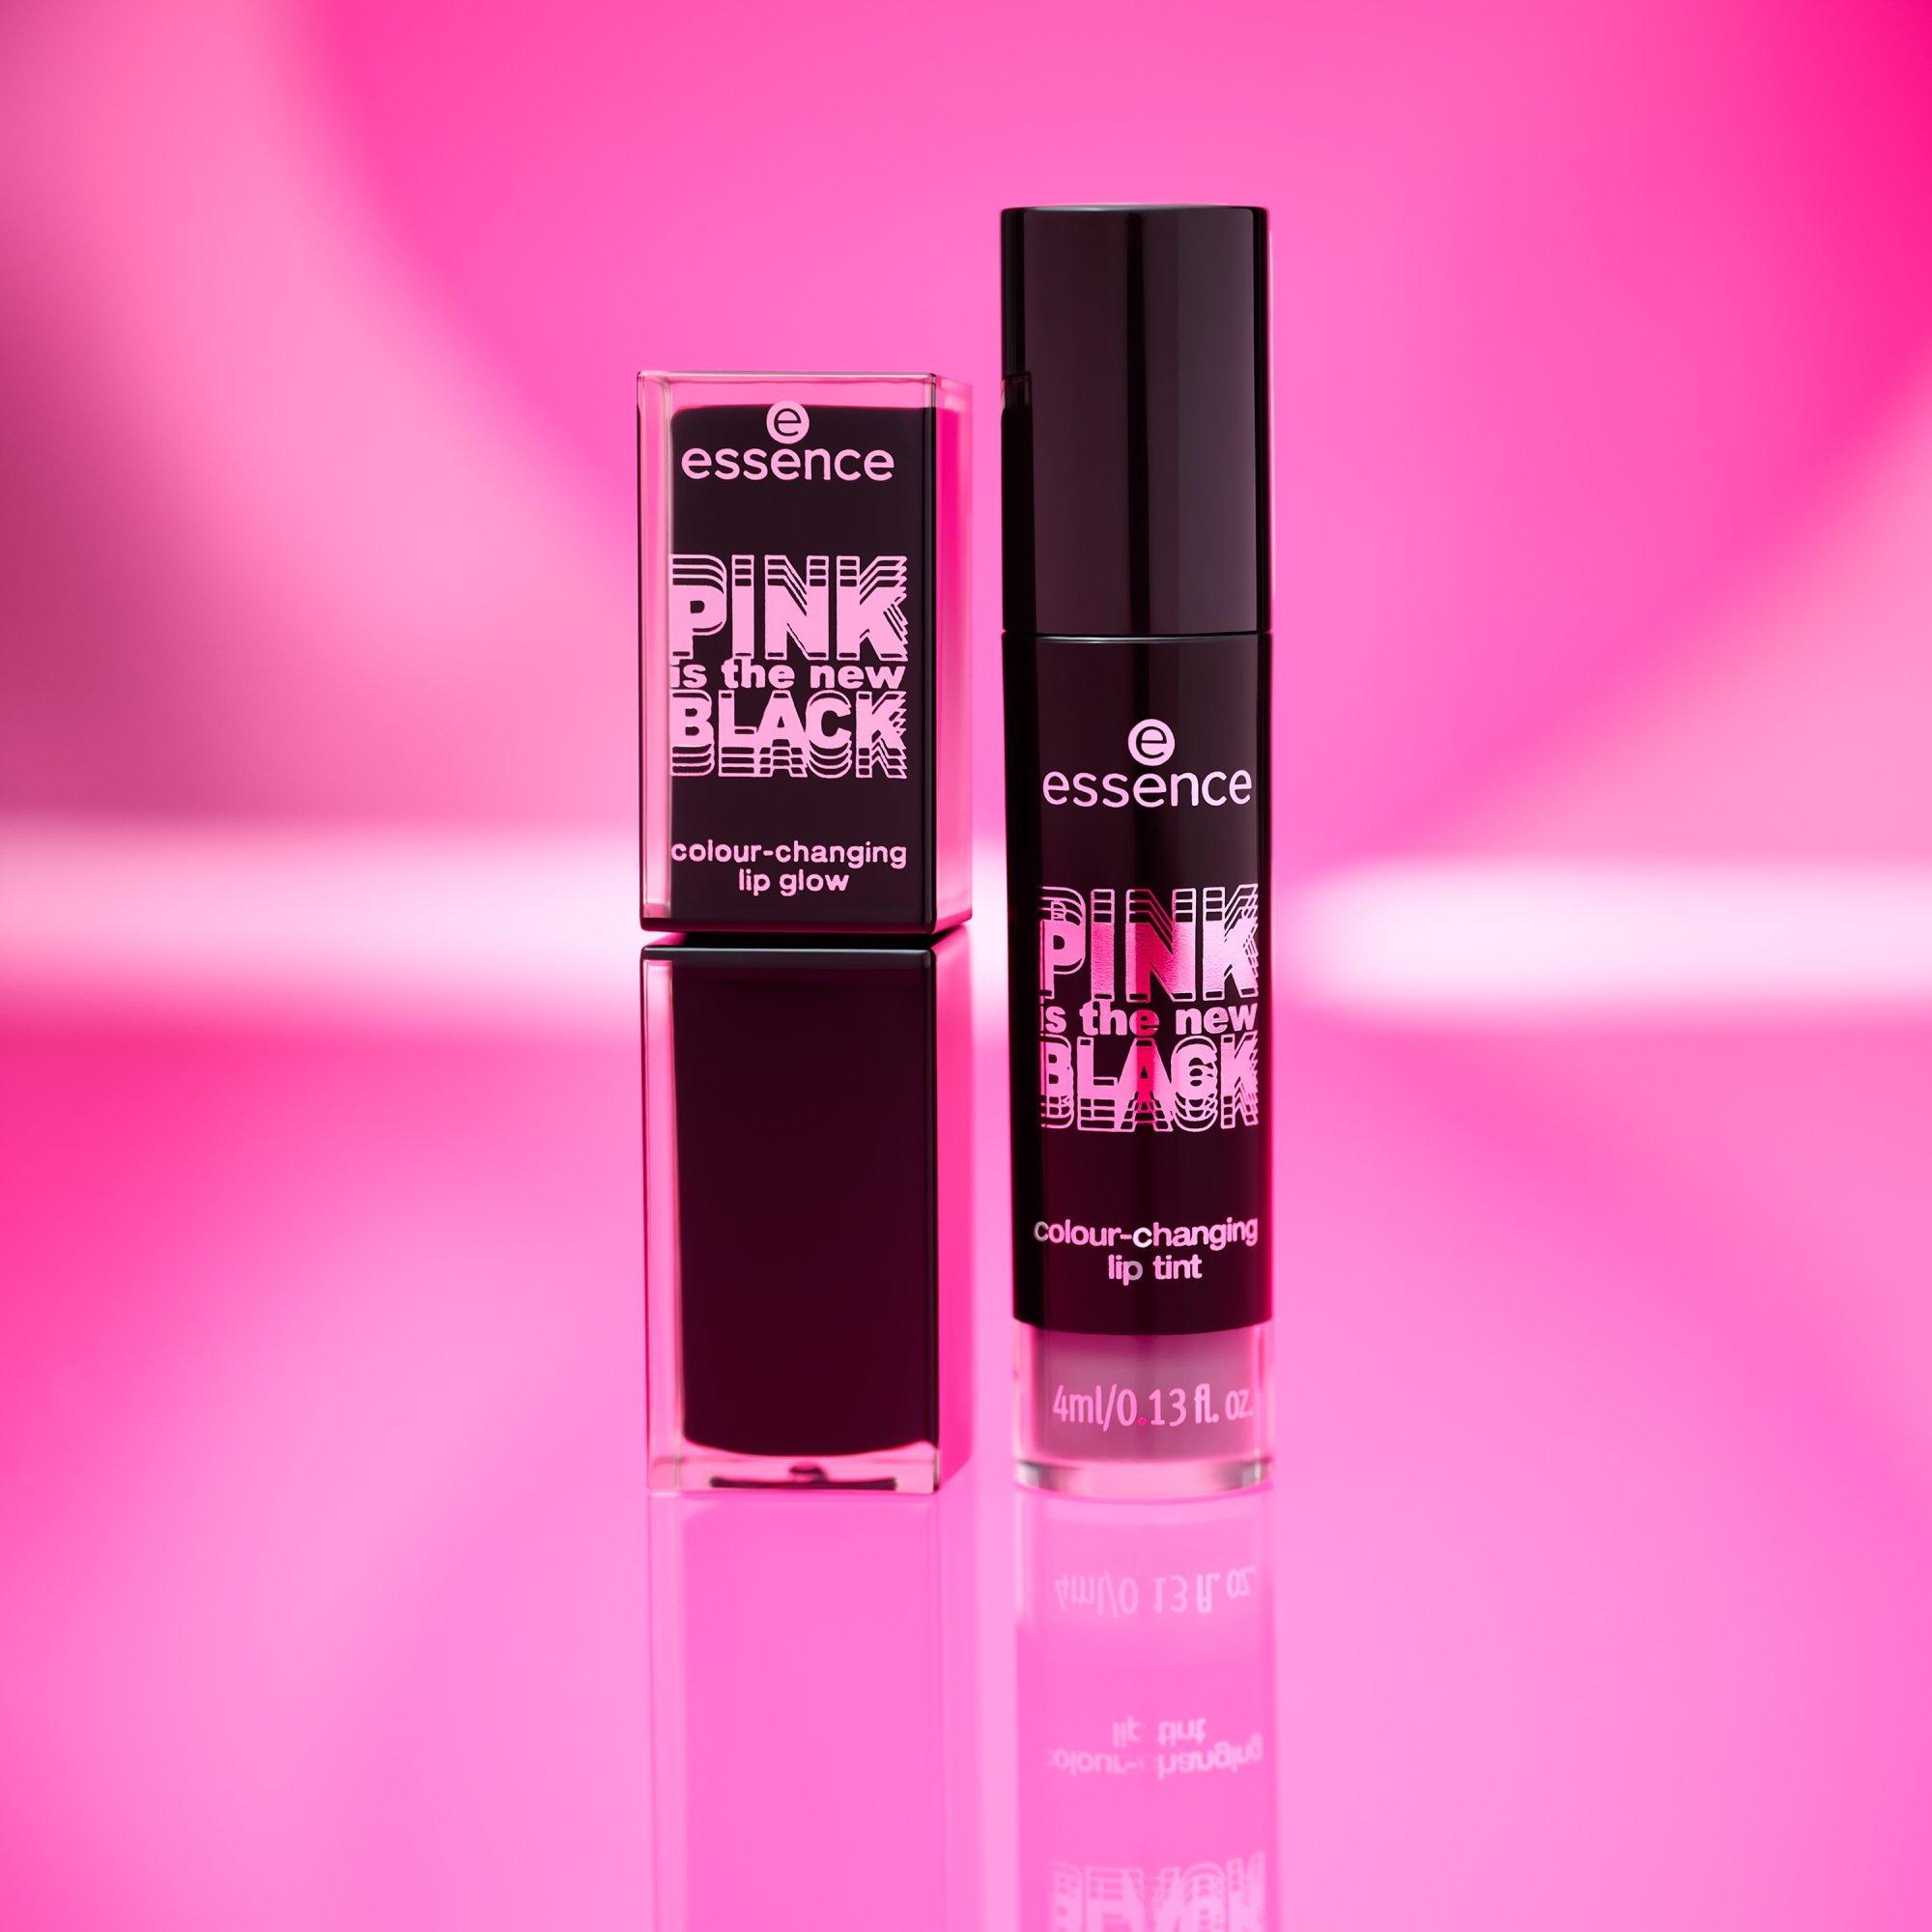 PINK is the new BLACK colour-changing lip tint